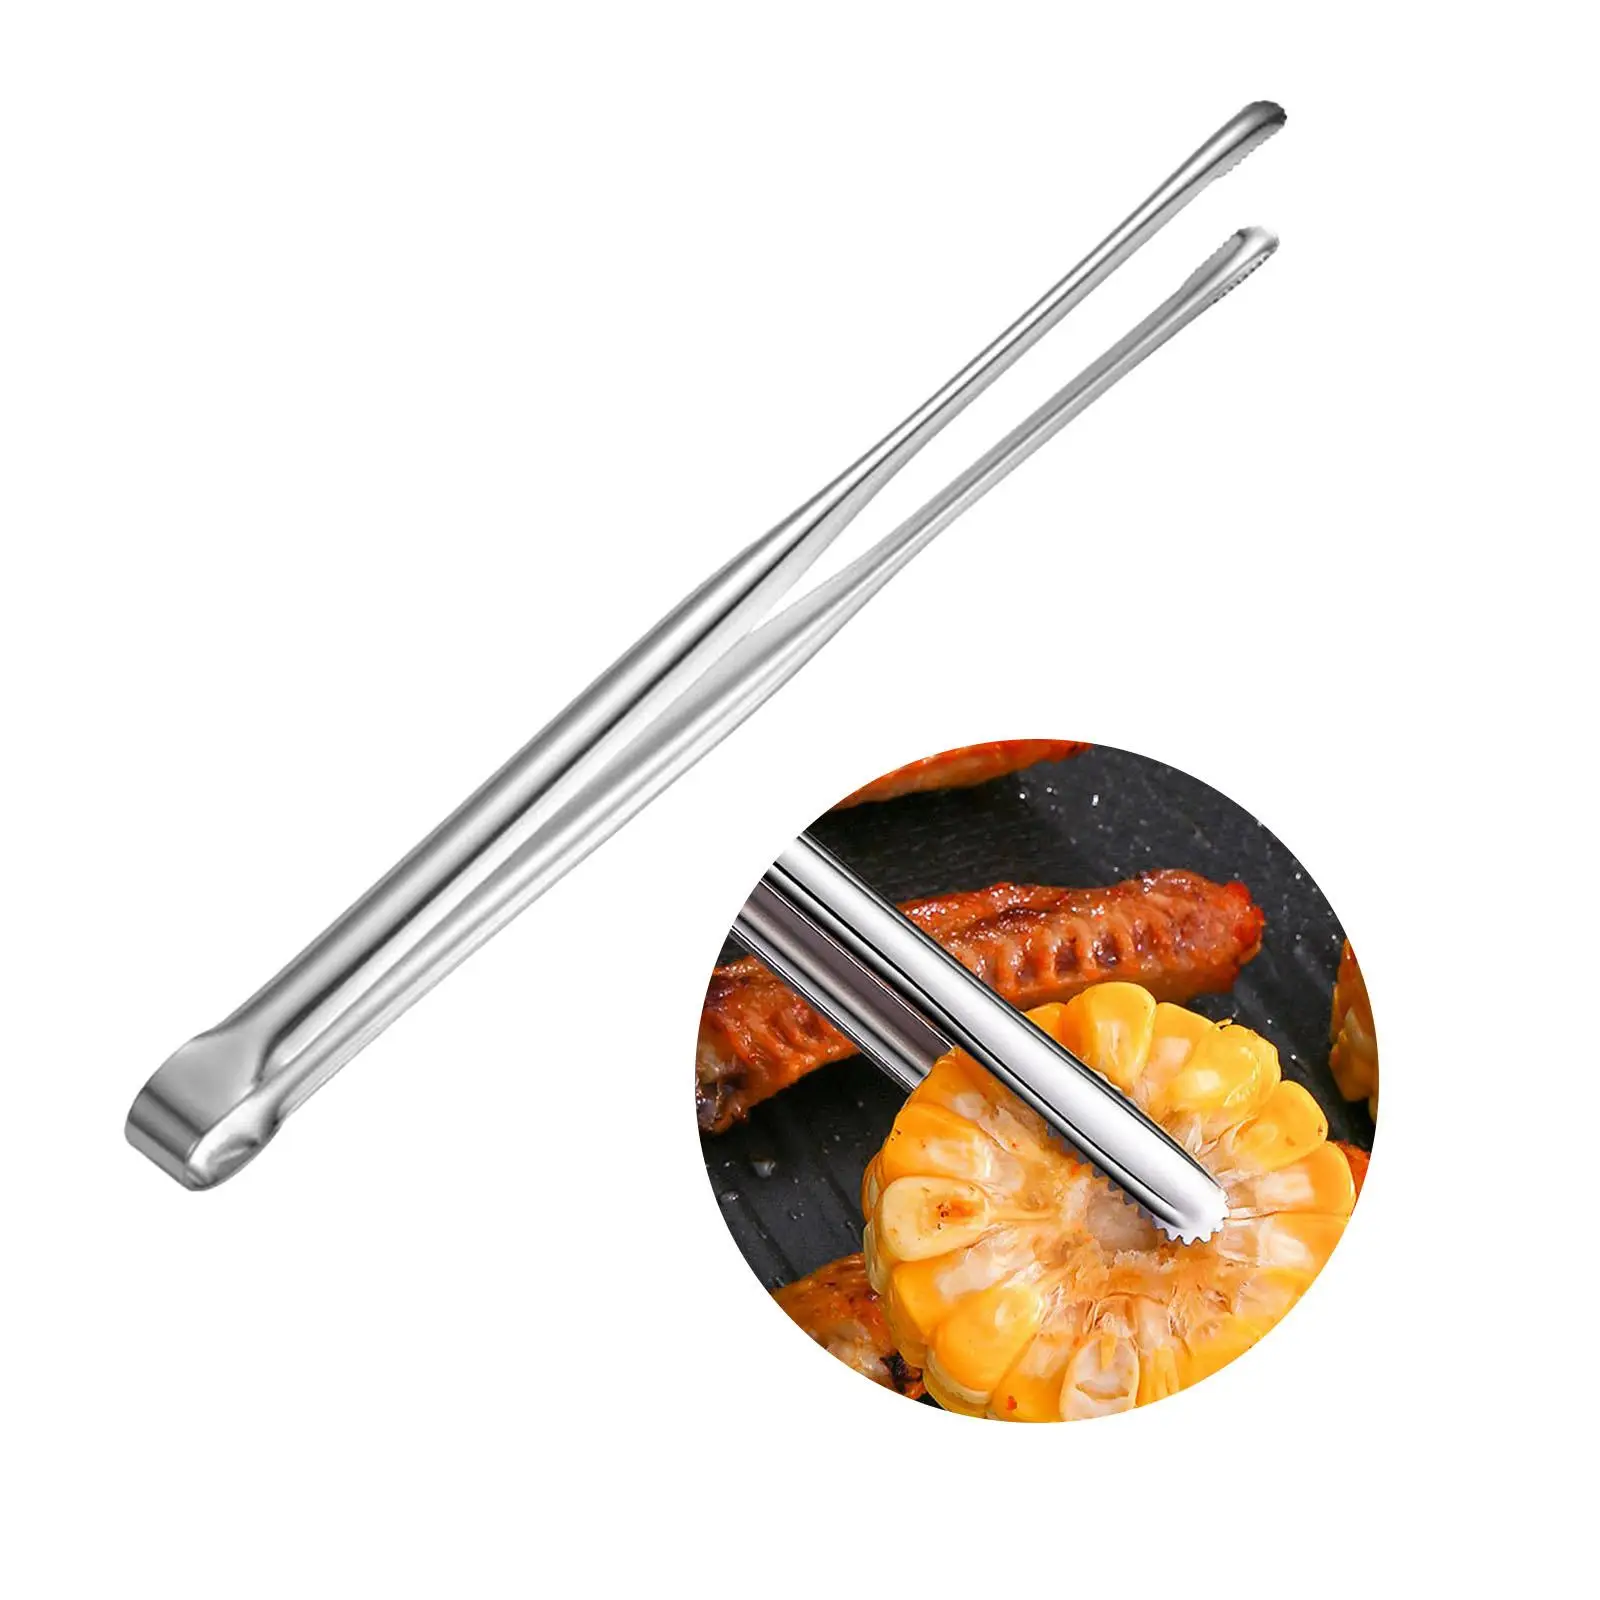 Barbecue Grilling Tongs Tweezer Stainless Steel Heavy Duty Japanese Style Salads Vegetable Clamp Bread Clip Steak Grill Clamp